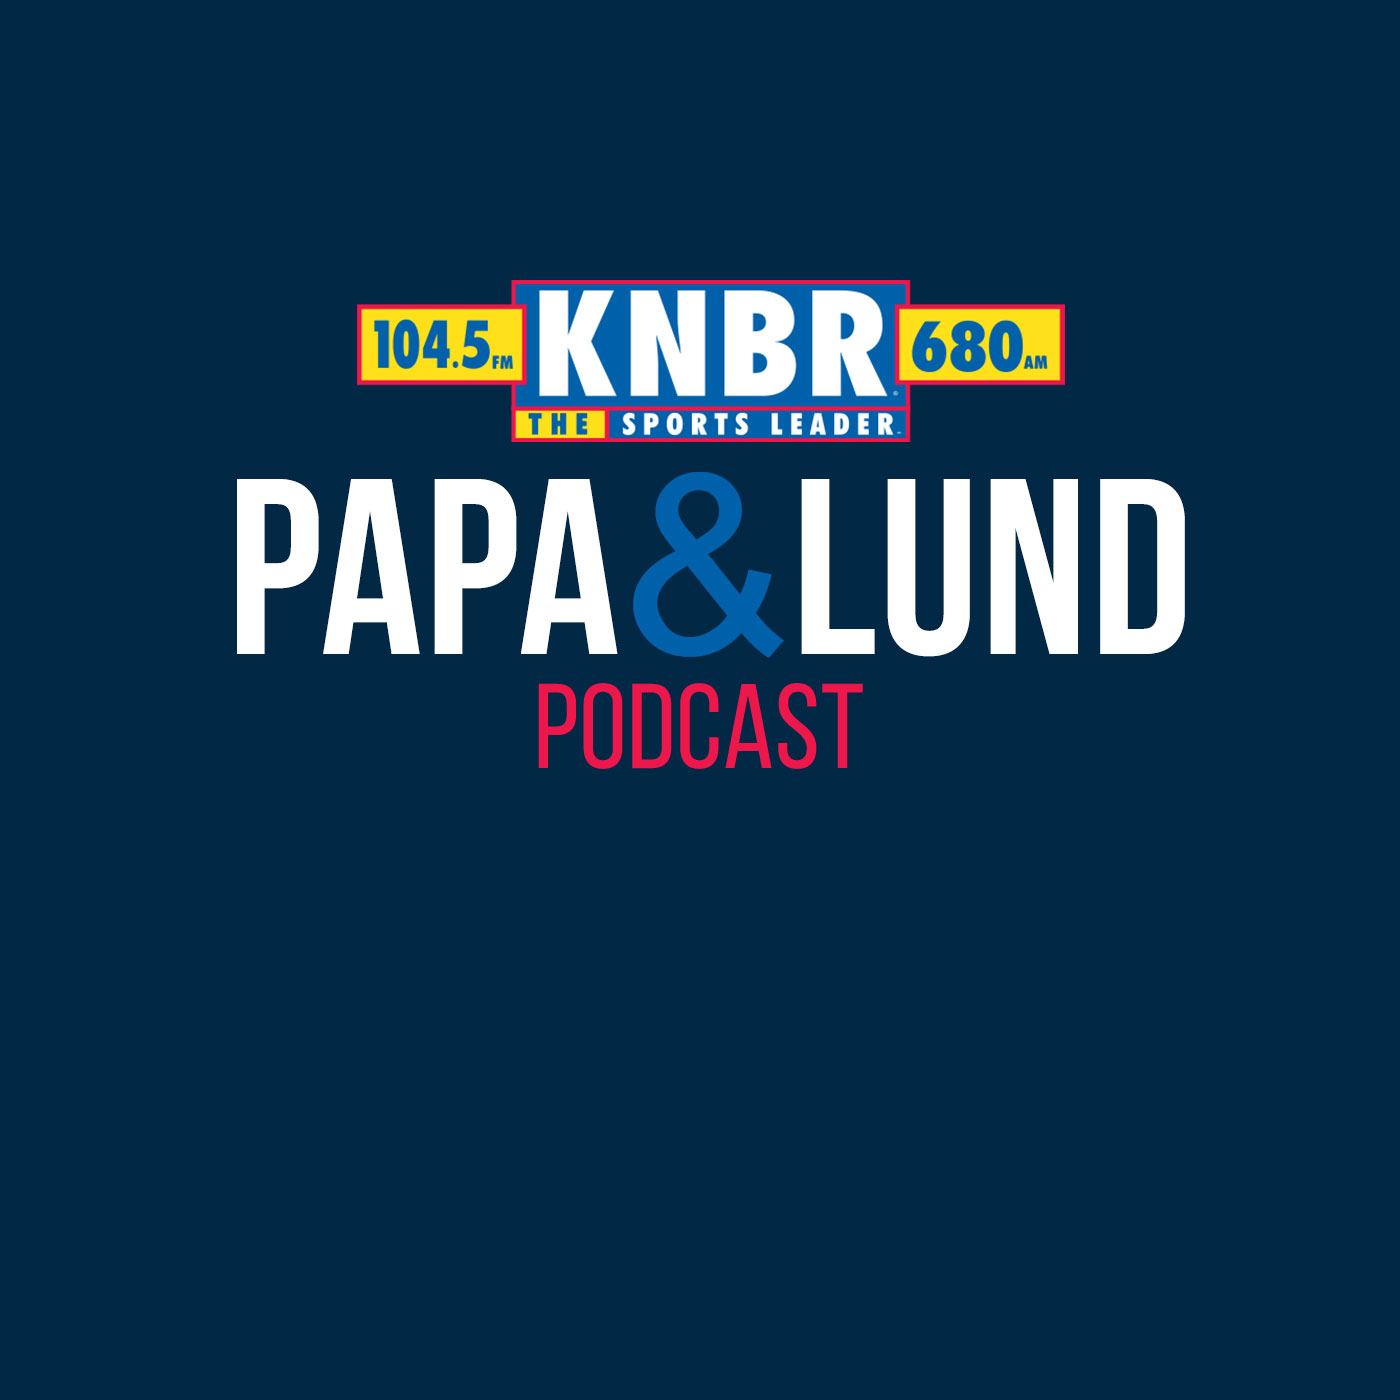 2-8 Mitch Holthus joins Papa & Lund LIVE from Media Row to discuss the wild ride of the Chiefs and their offense becoming more dangerous without Tyreek Hill and how their defense is going to have a challenge guarding the Eagles receivers and how that can make or break their Superbowl hopes